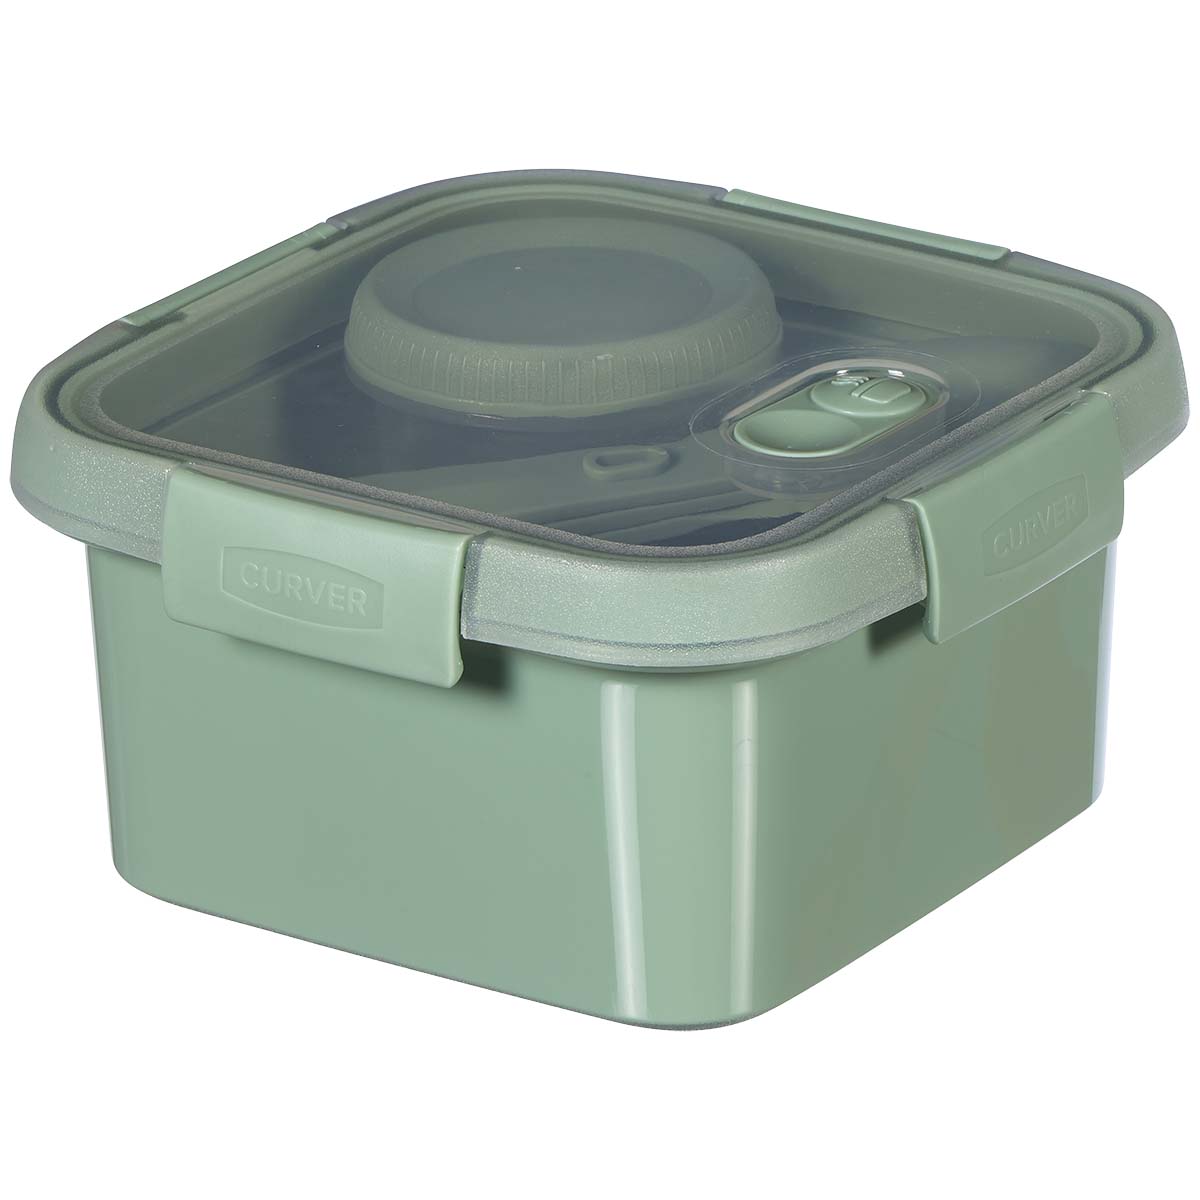 6302233 Lid with 4 sturdy clips and a flexible seal to keep the contents fresh and prevent leaks. Includes a tray, sauce cup (0.8L), and a cutlery set with a fork, knife, and spoon. Steam valve on the lid for easy use in the microwave. Made of 100% recycled polypropylene, BPA and phthalate-free.